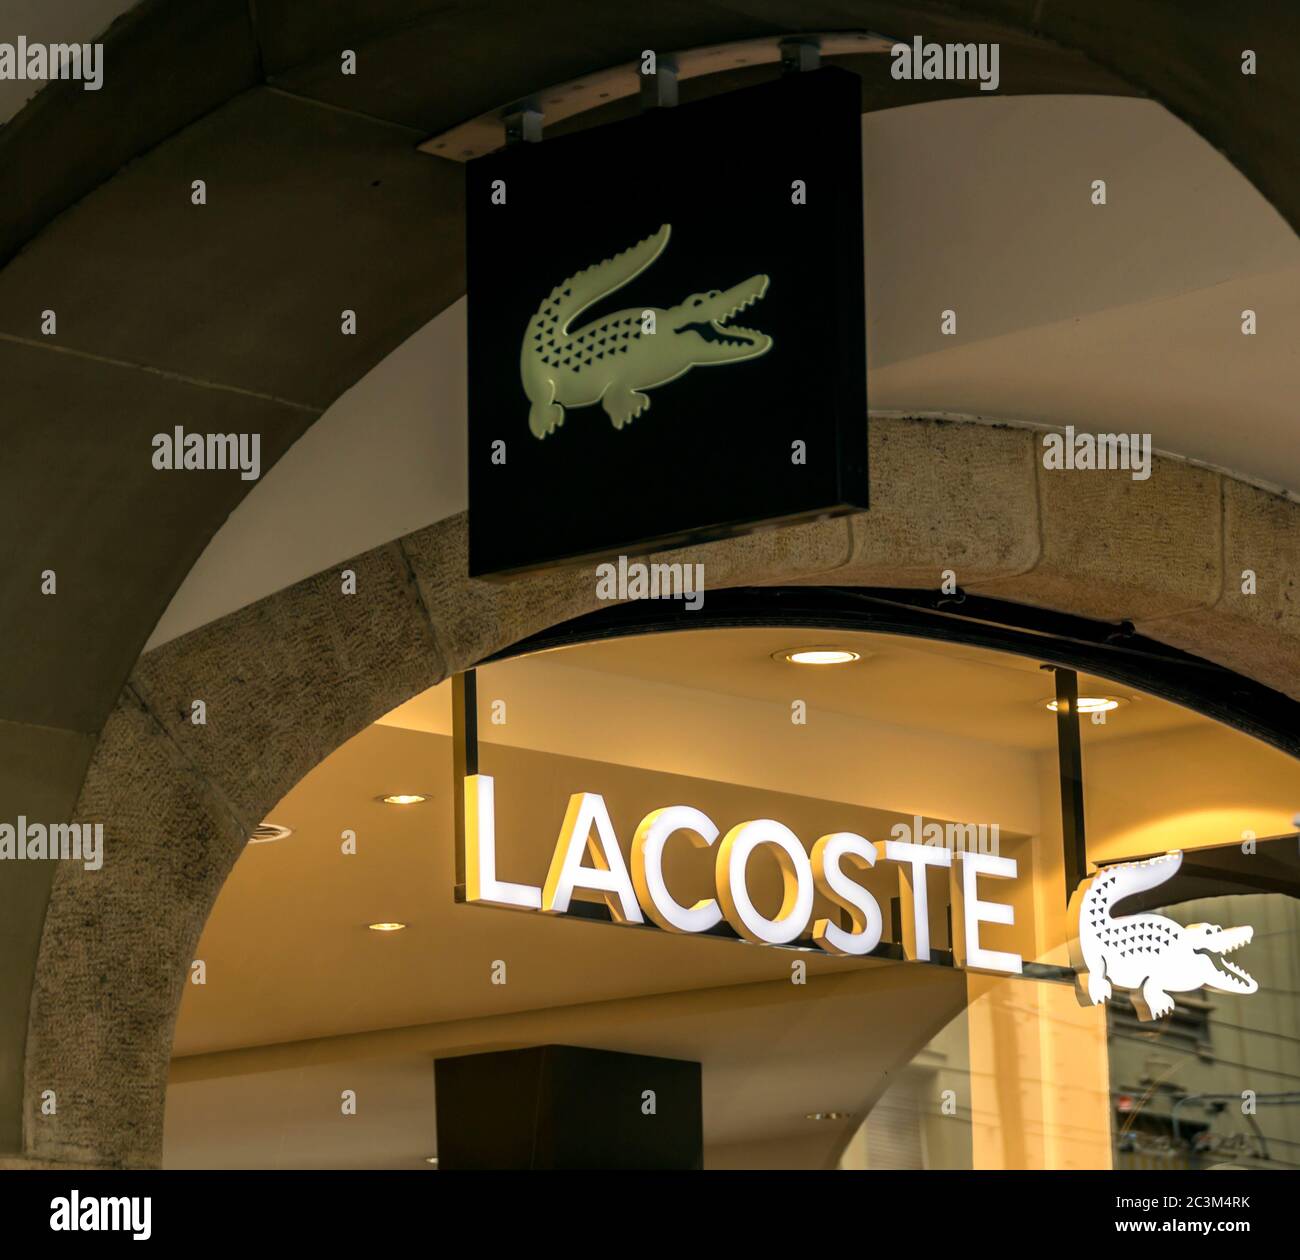 Bern, Switzerland - Lacoste shop. Lacoste is a French clothing company,  founded in 1933 by tennis player René Lacoste and André Gillier Stock Photo  - Alamy